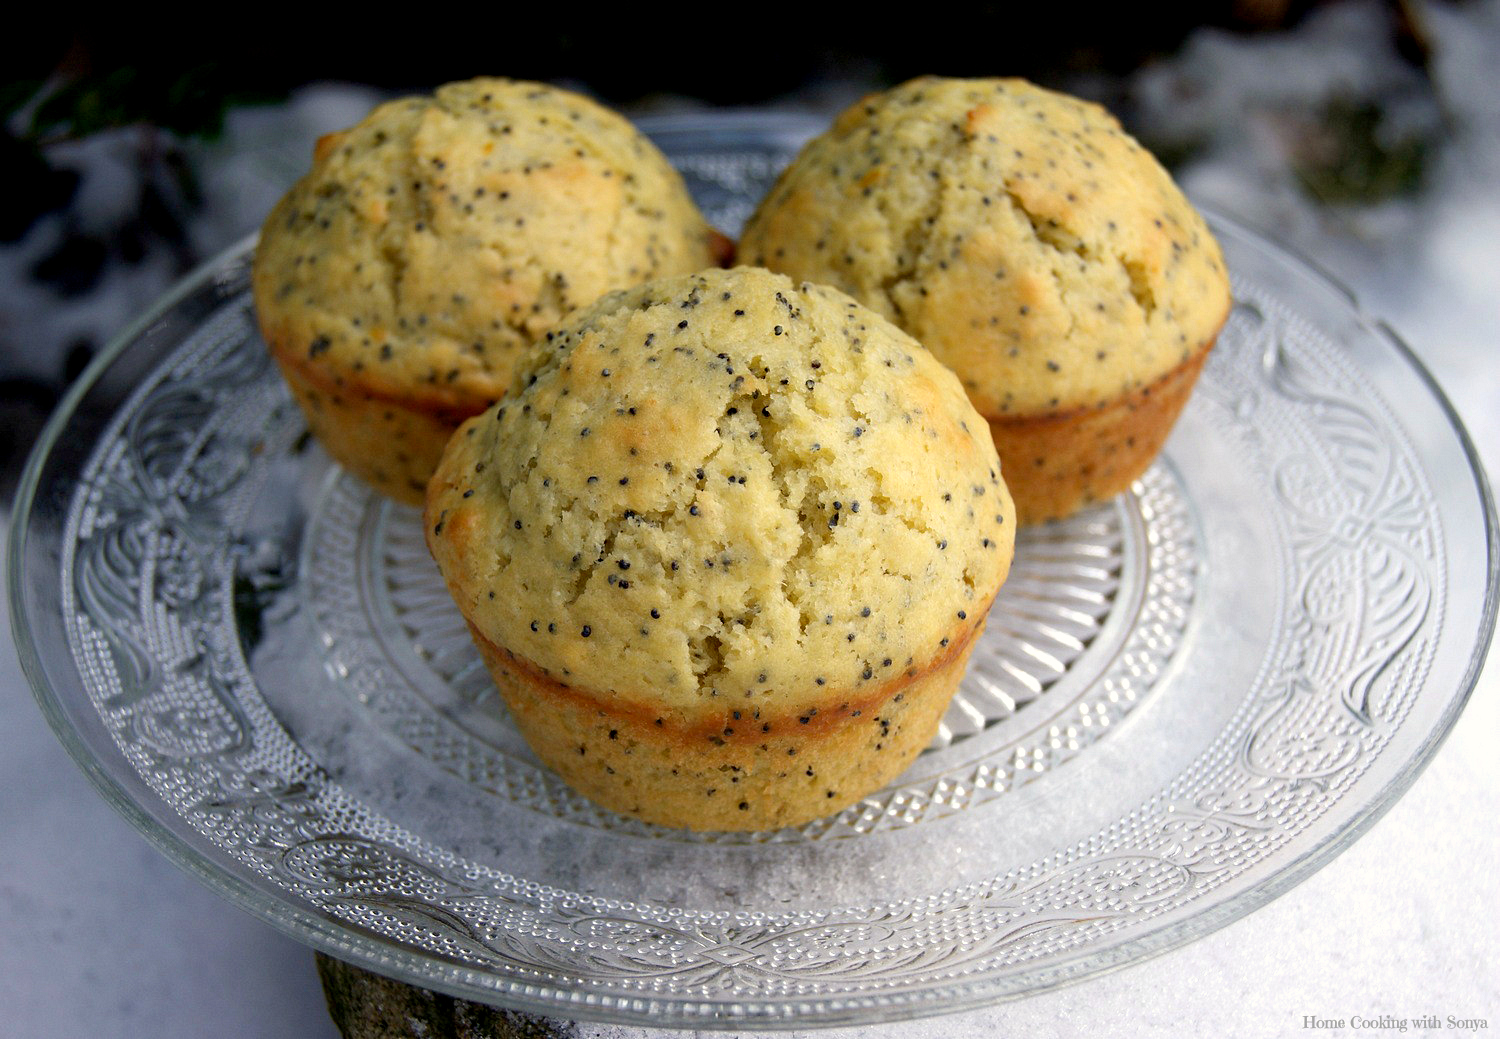 Home Cooking with Sonya: Lemon Poppy Seed Buttermilk Muffins